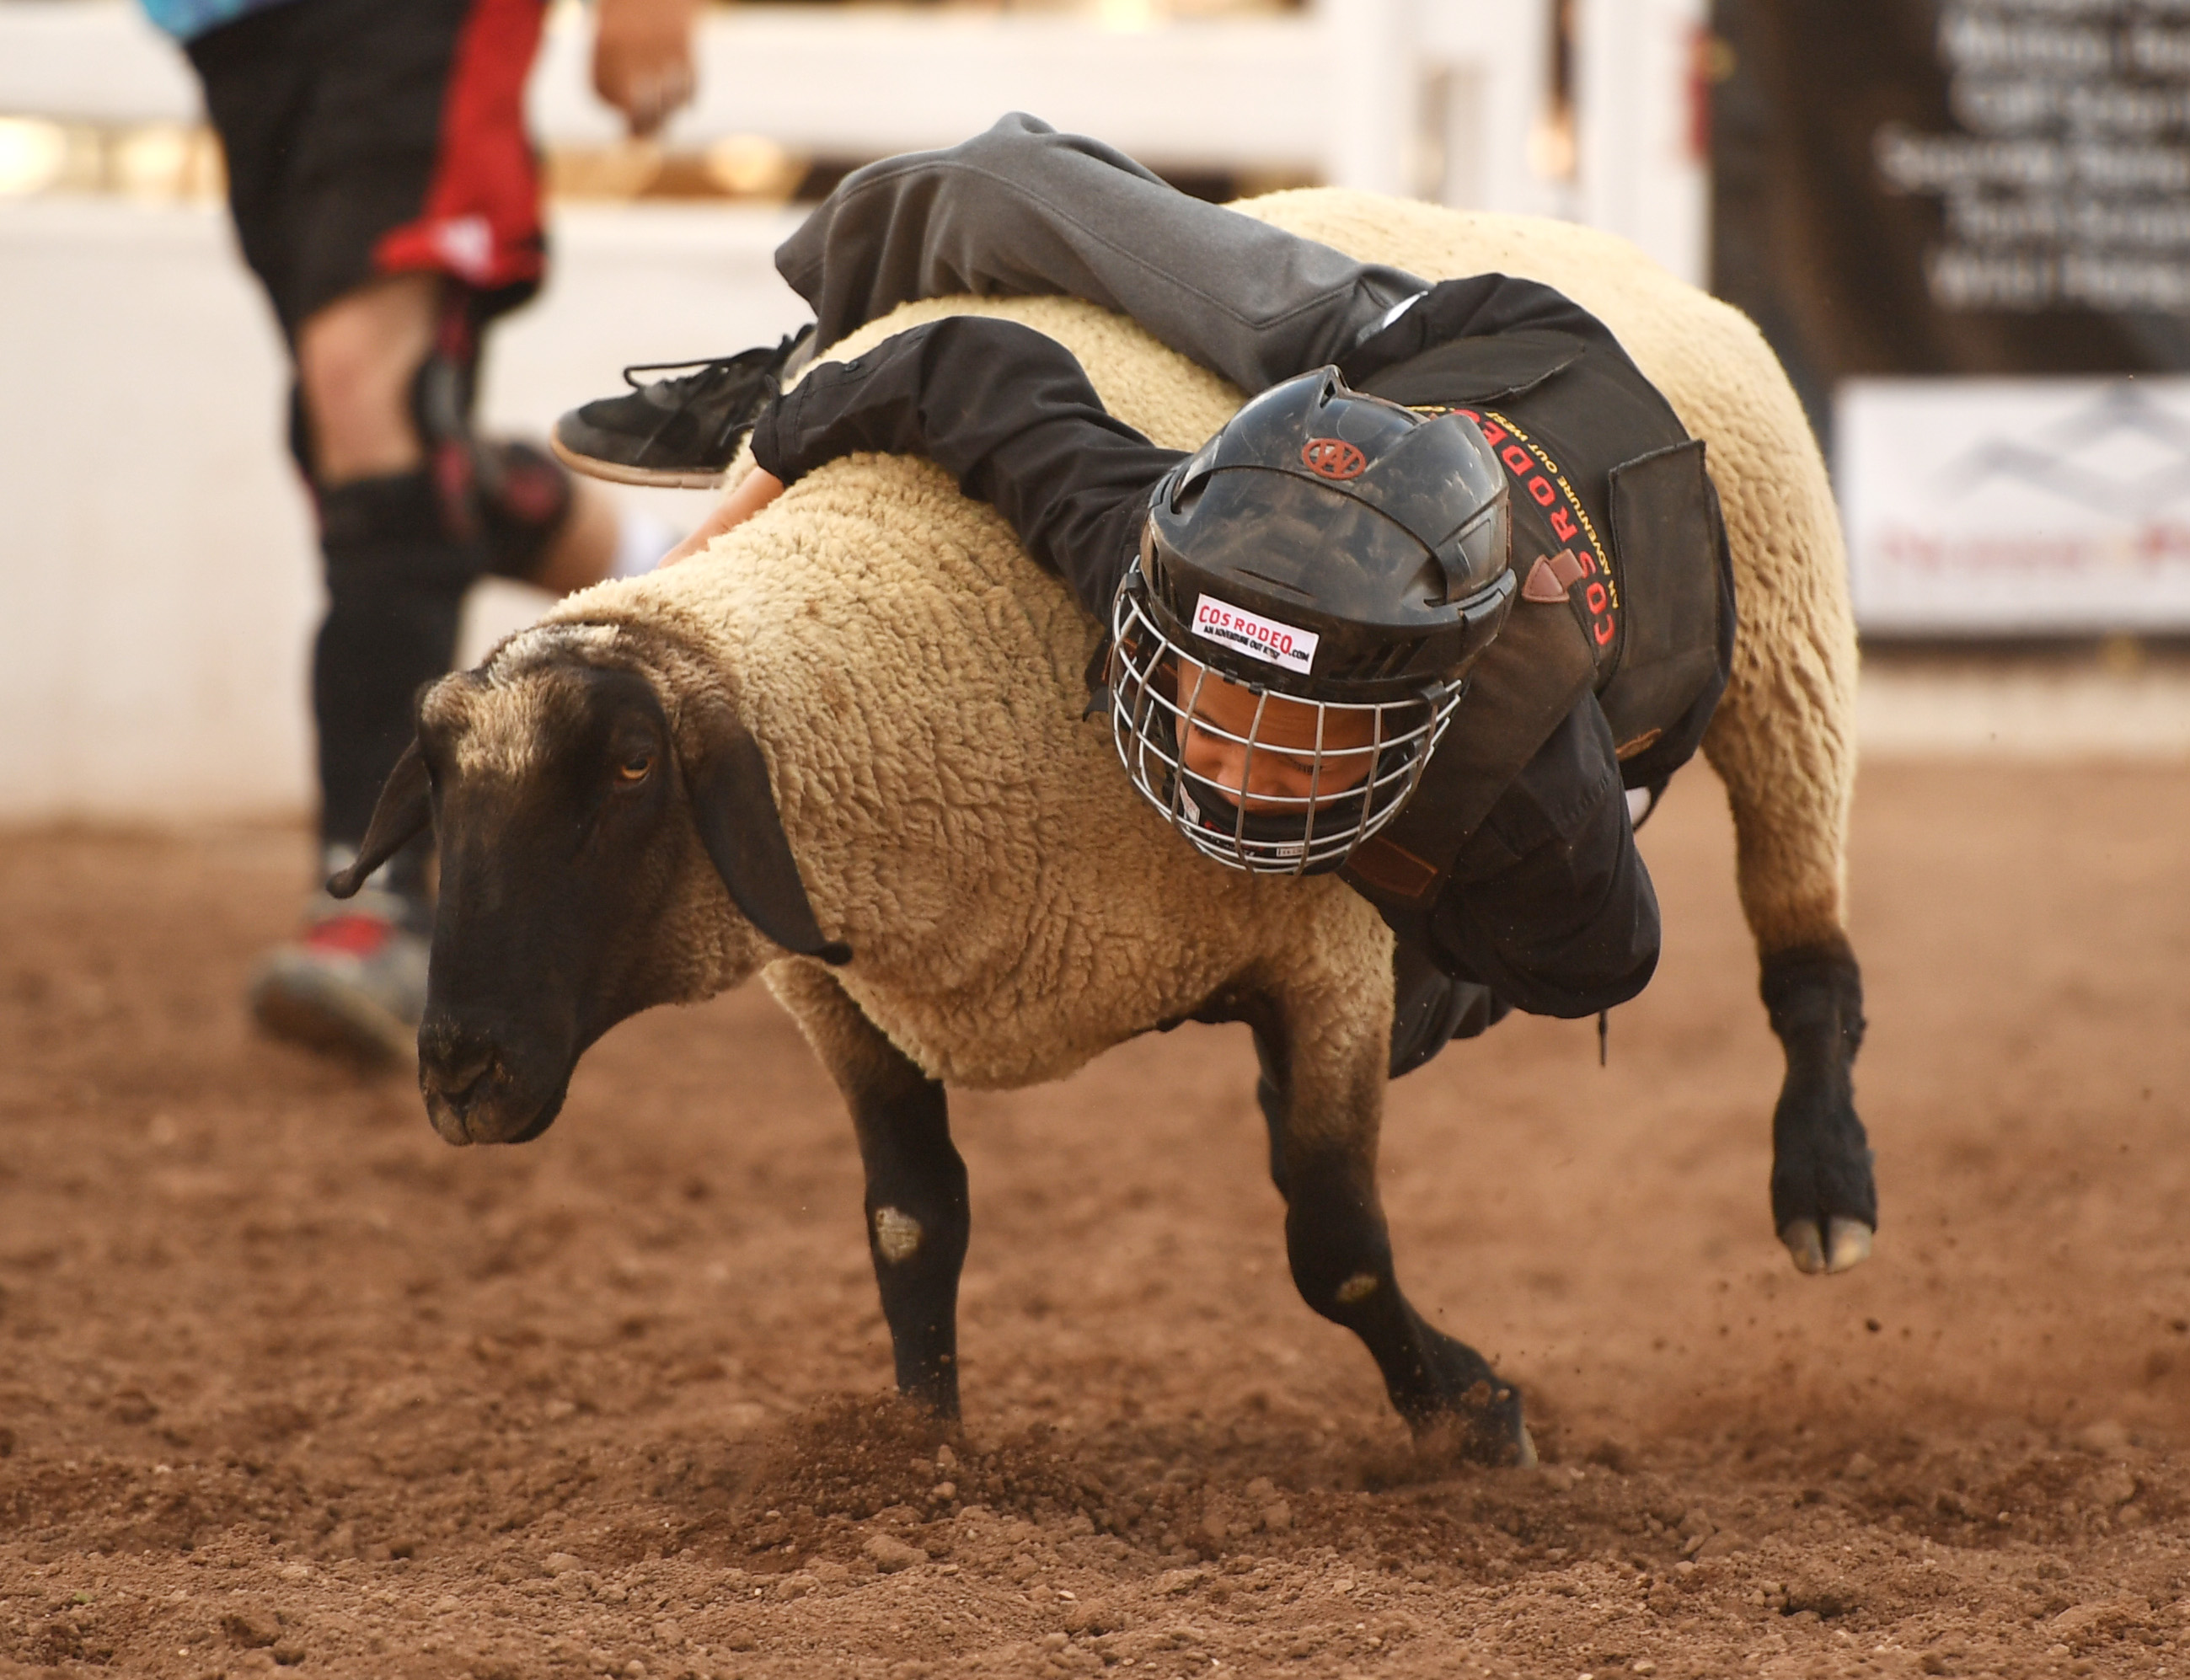 The fourth COS Rodeo of the summer took place Wednesday, July 6, 2016 at the Norris-Penrose Event Center. The event resumes for four consecutive Wednesday nights at 5pm beginning July 27th. Tickets art $34 and include dinner, rodeo and a concert. Visitors can even participate in certain selected events. Photo by Mark Reis, The Gazette